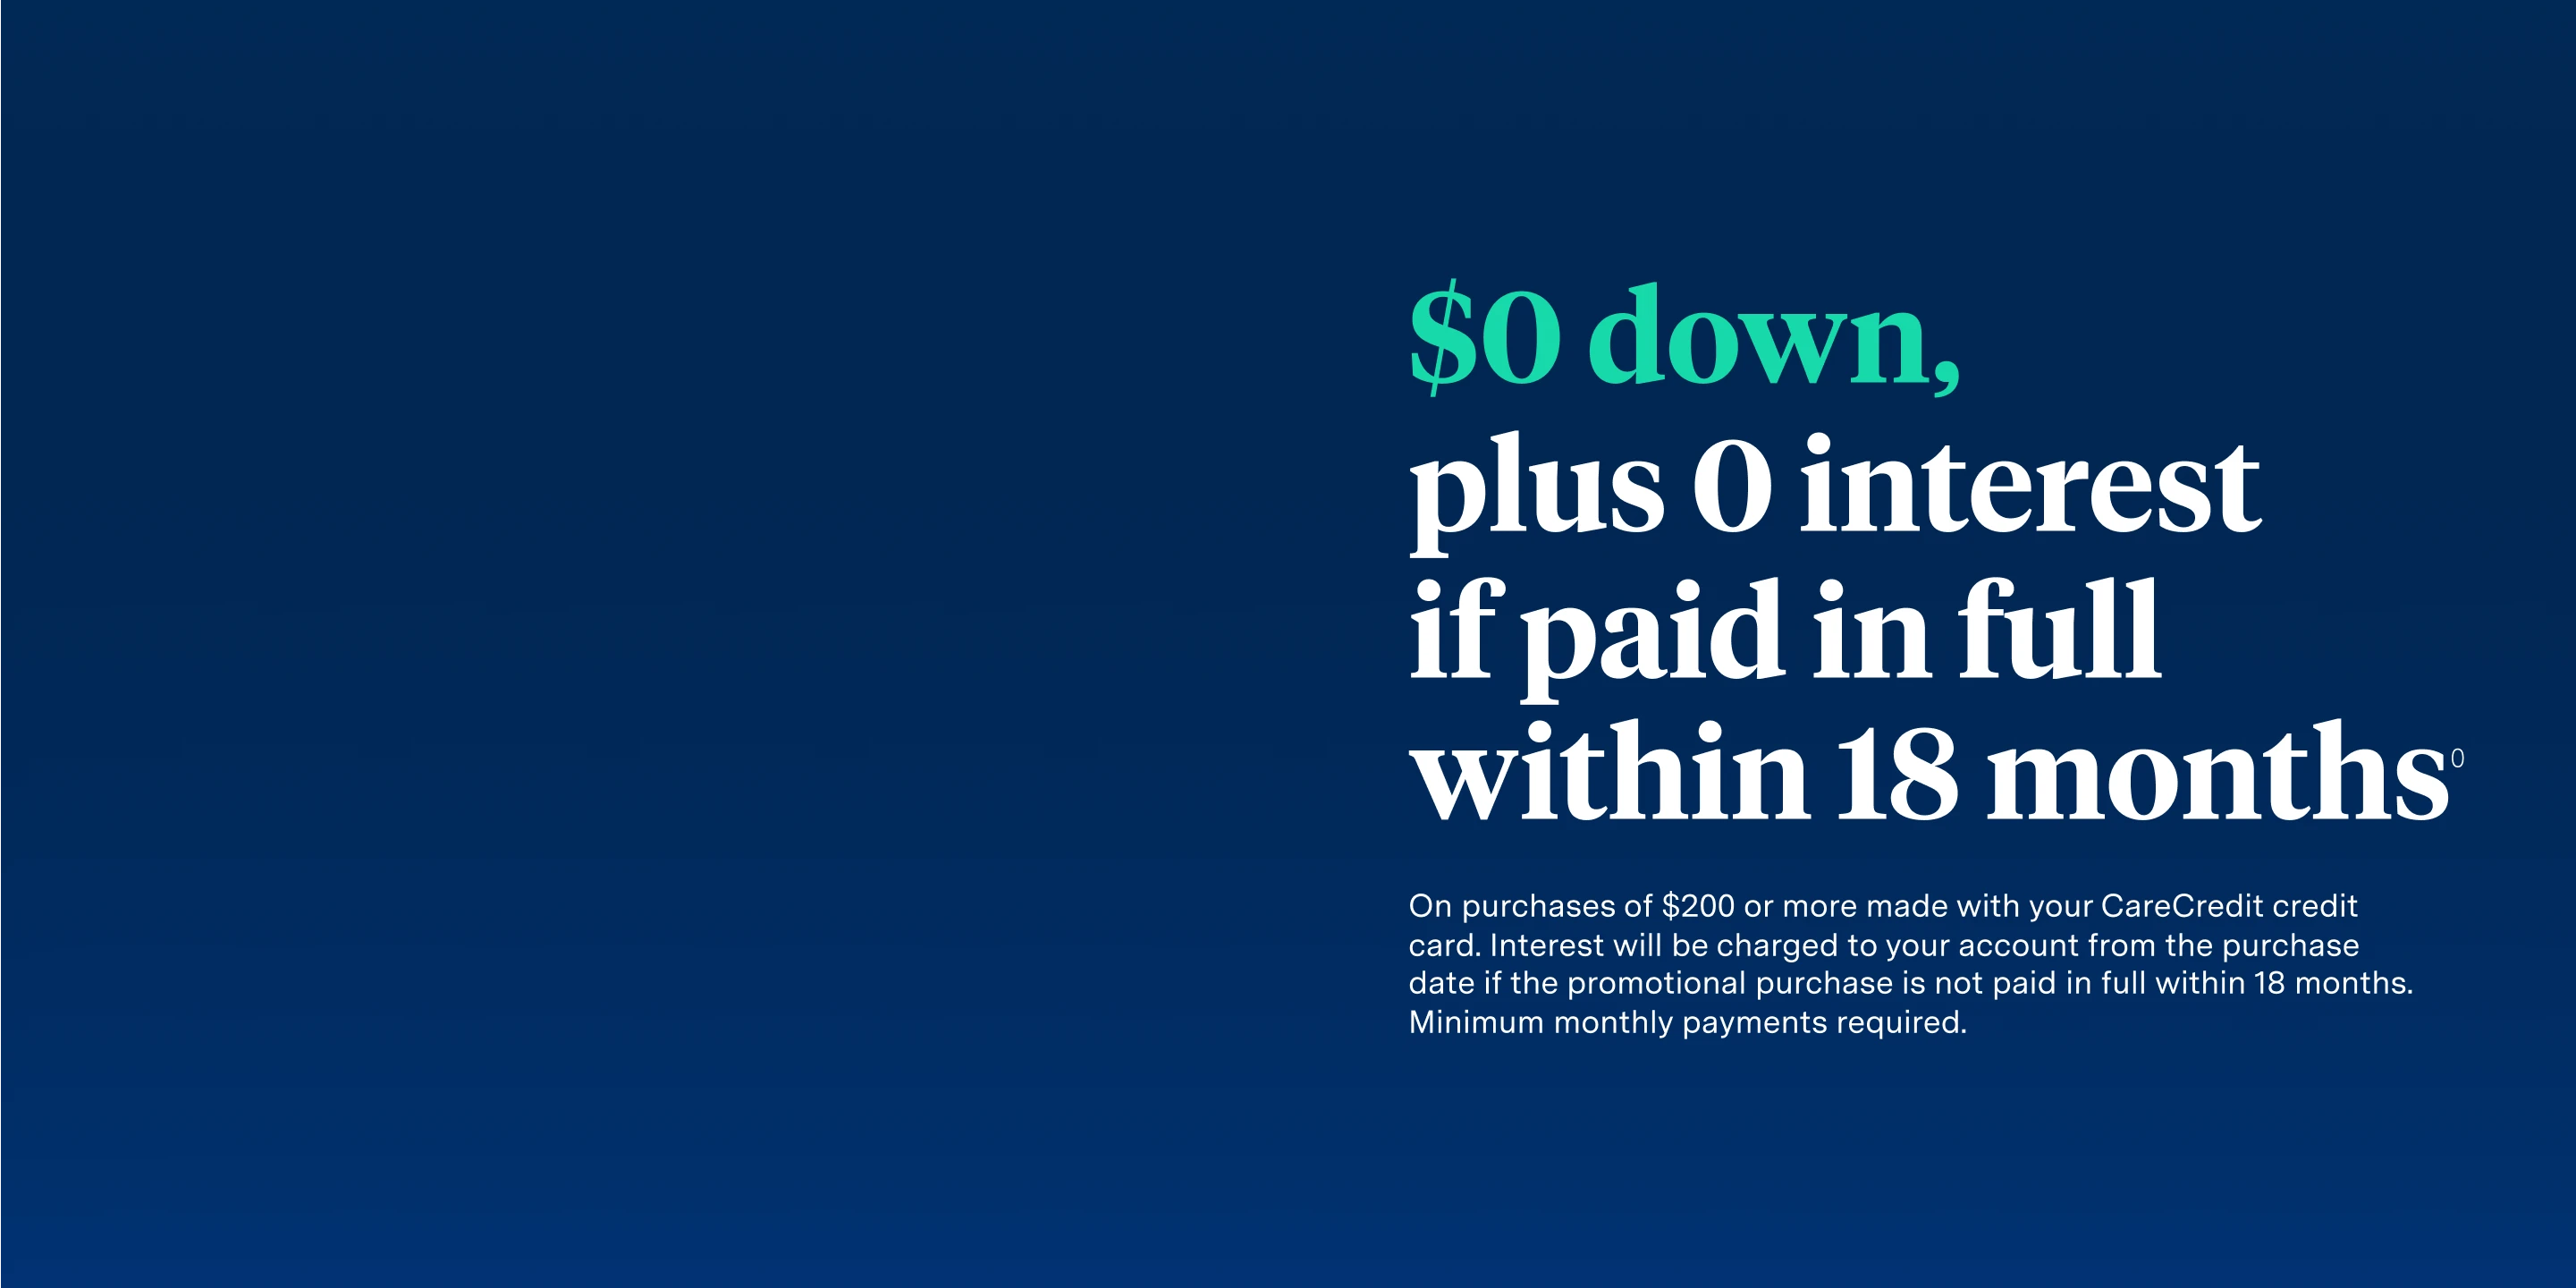 $0 down, plus 0 interest if paid in full within 18 months on purchases of $200 or more with your CareCredit credit card. 